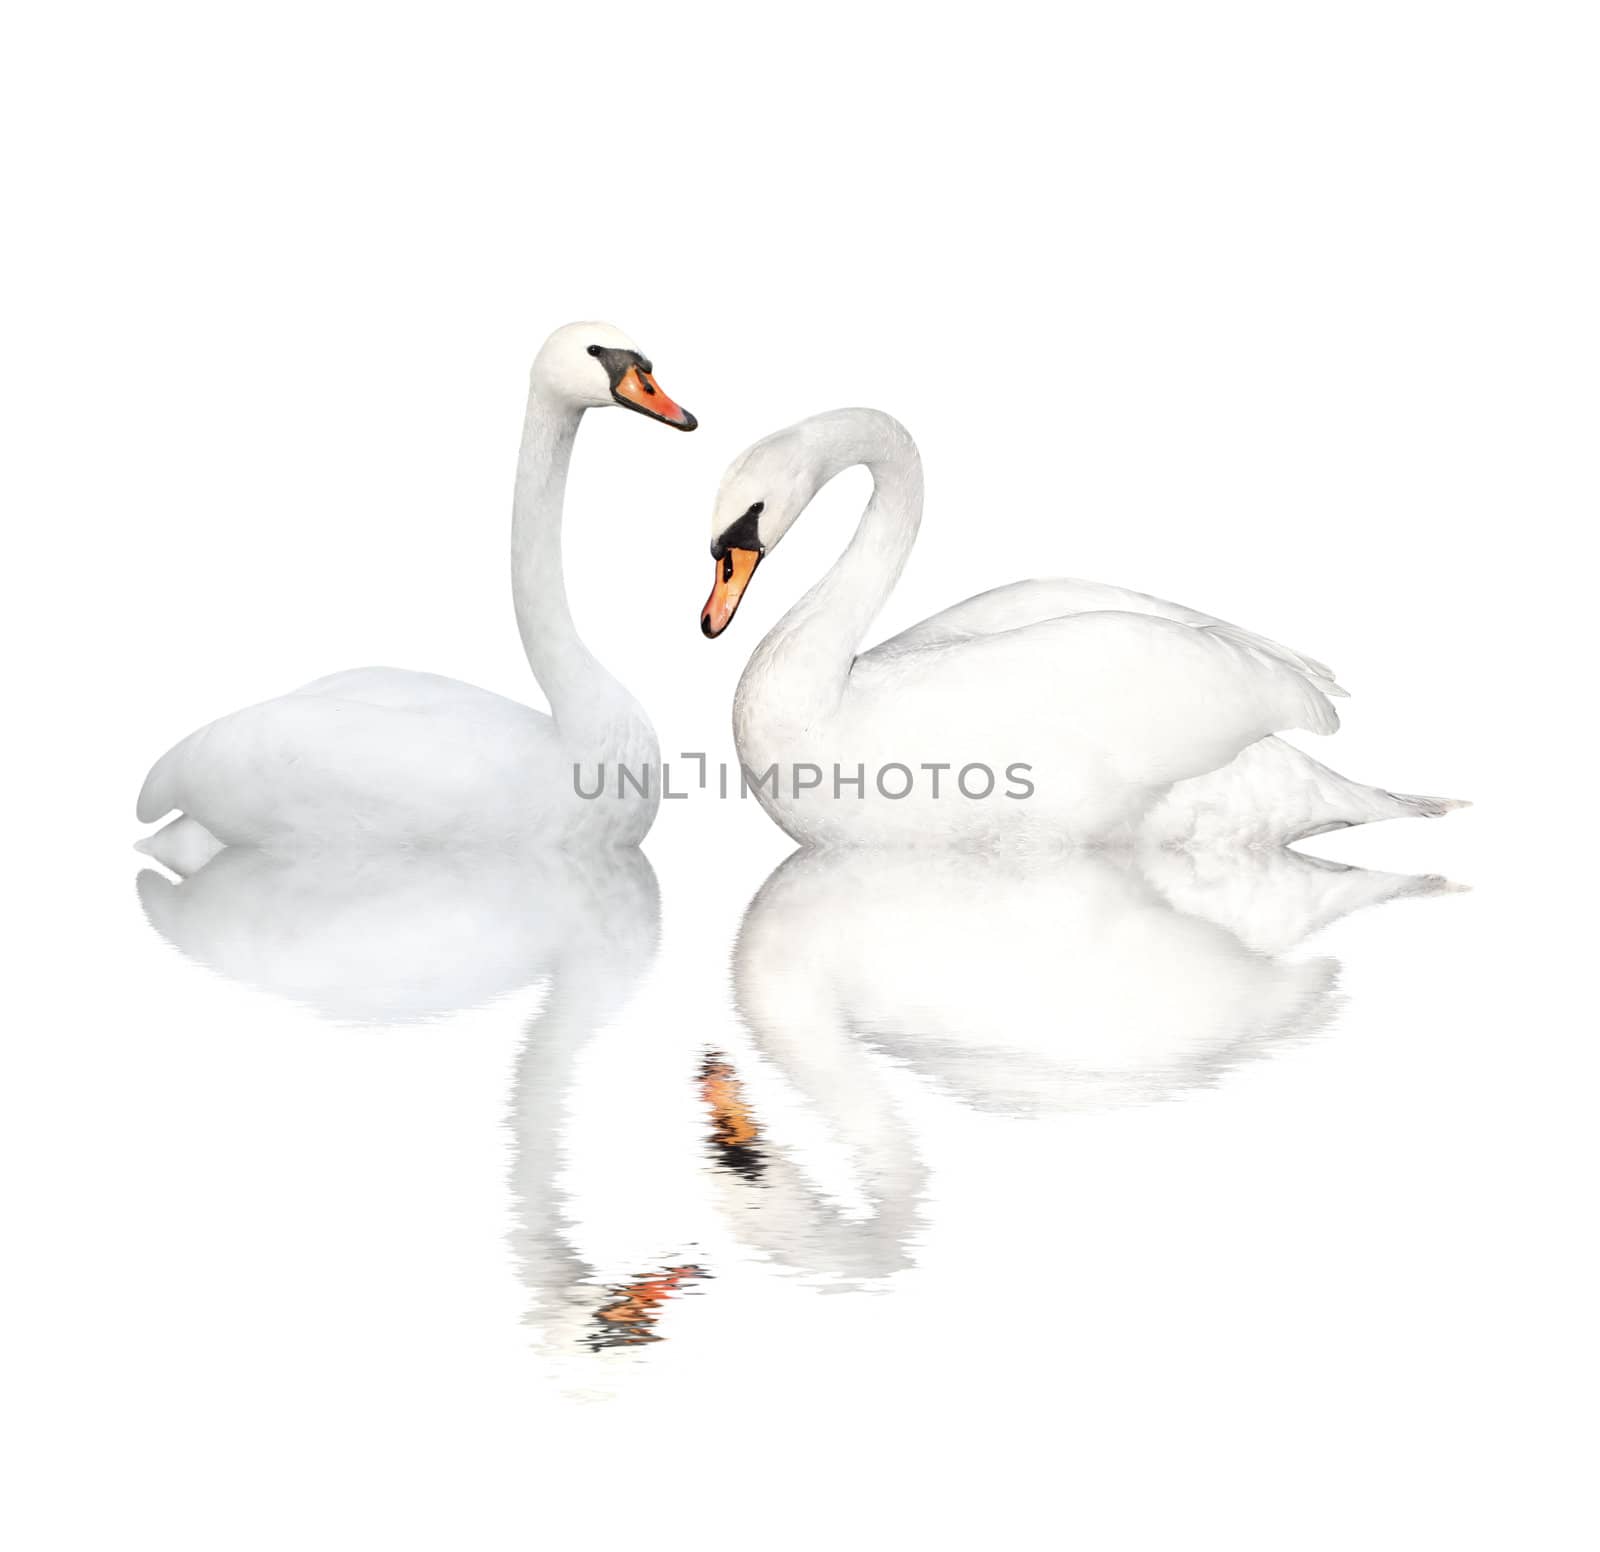 Two white swans. Isolated over white